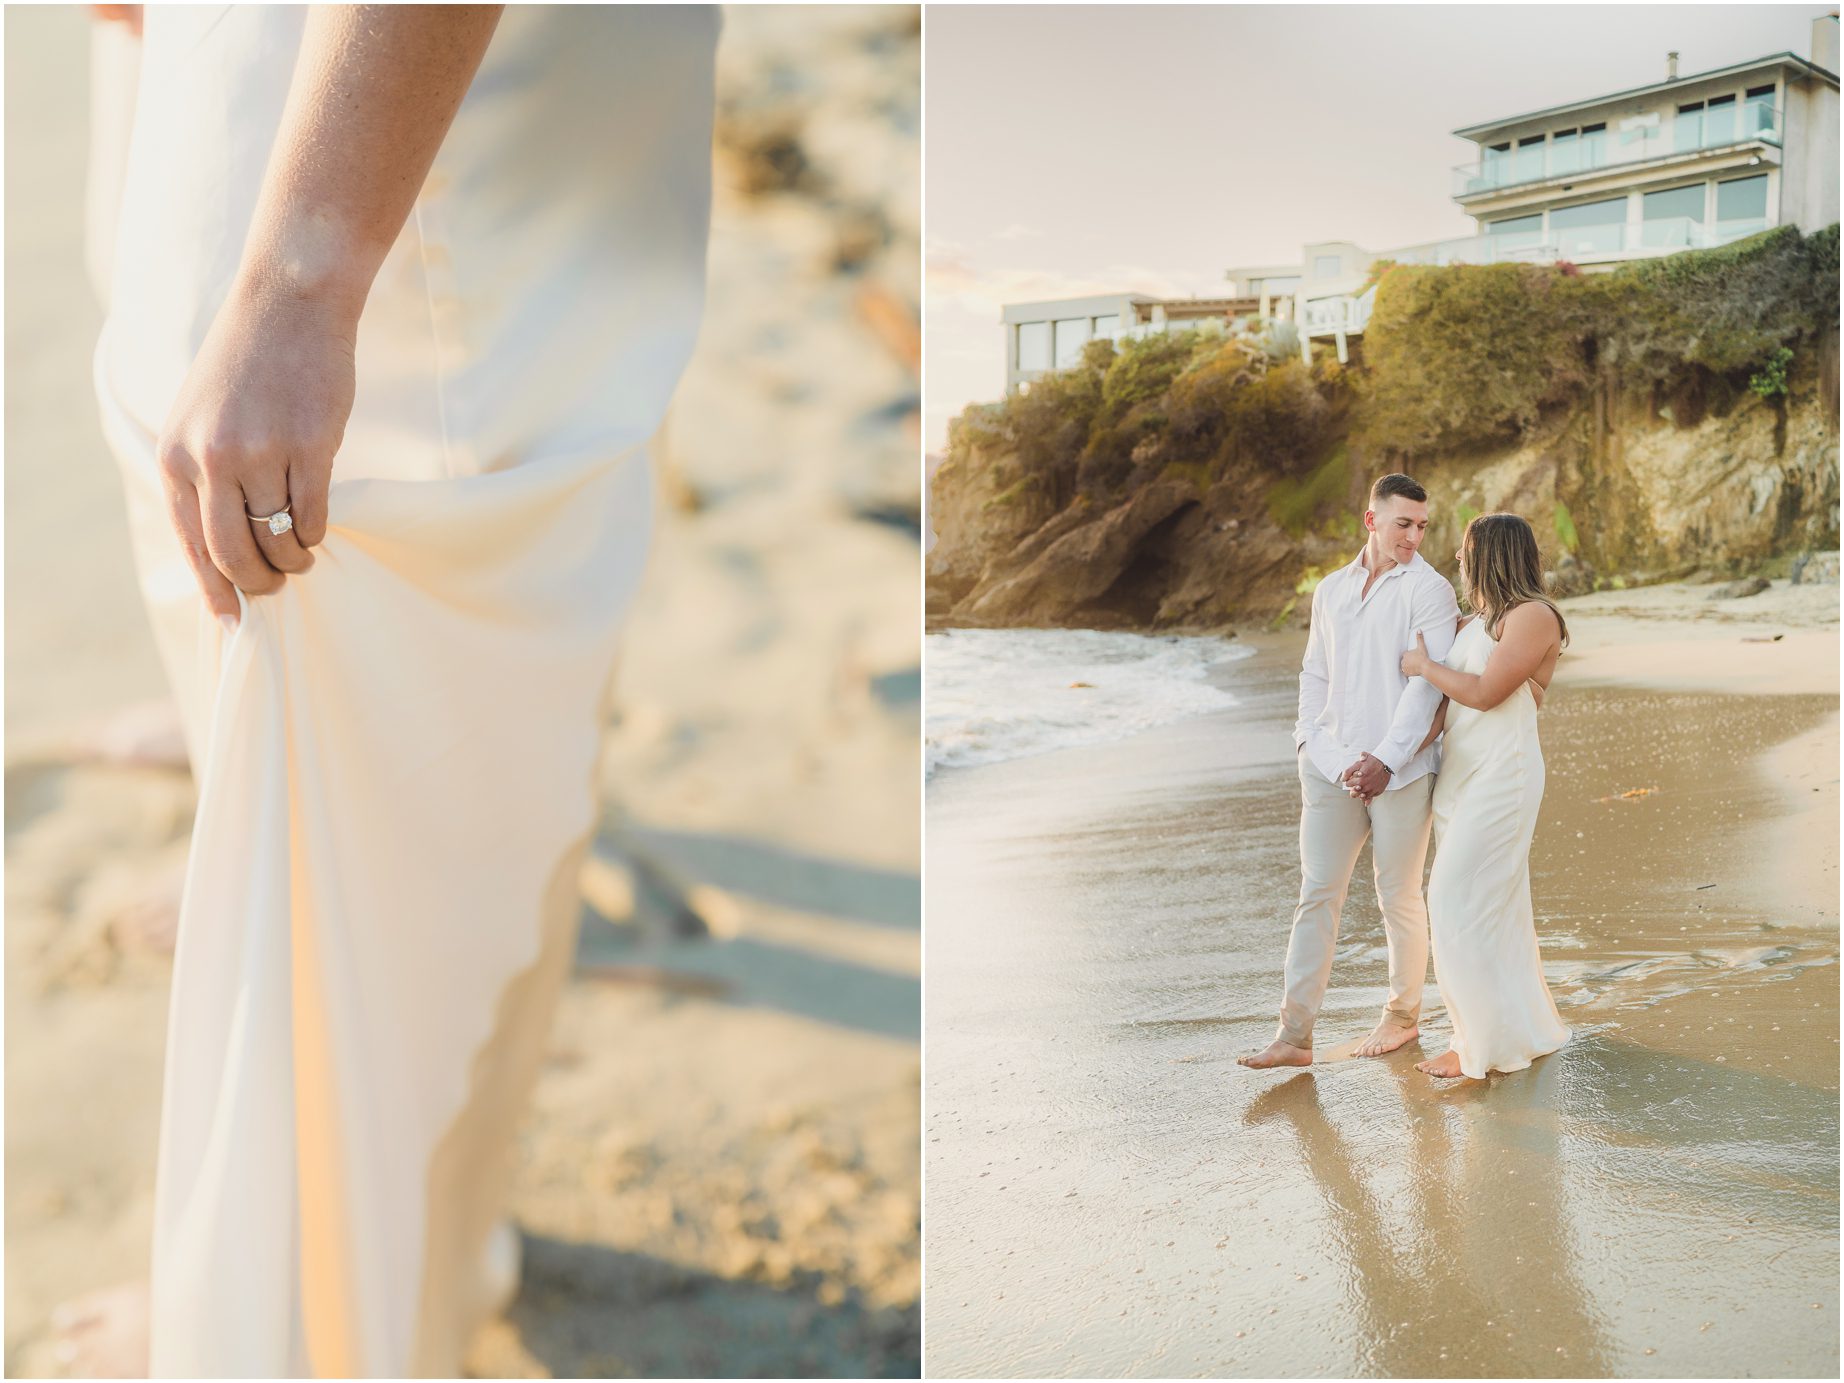 An engagement ring on a woman's finger and a photo of her with her fianc in Laguna Beach